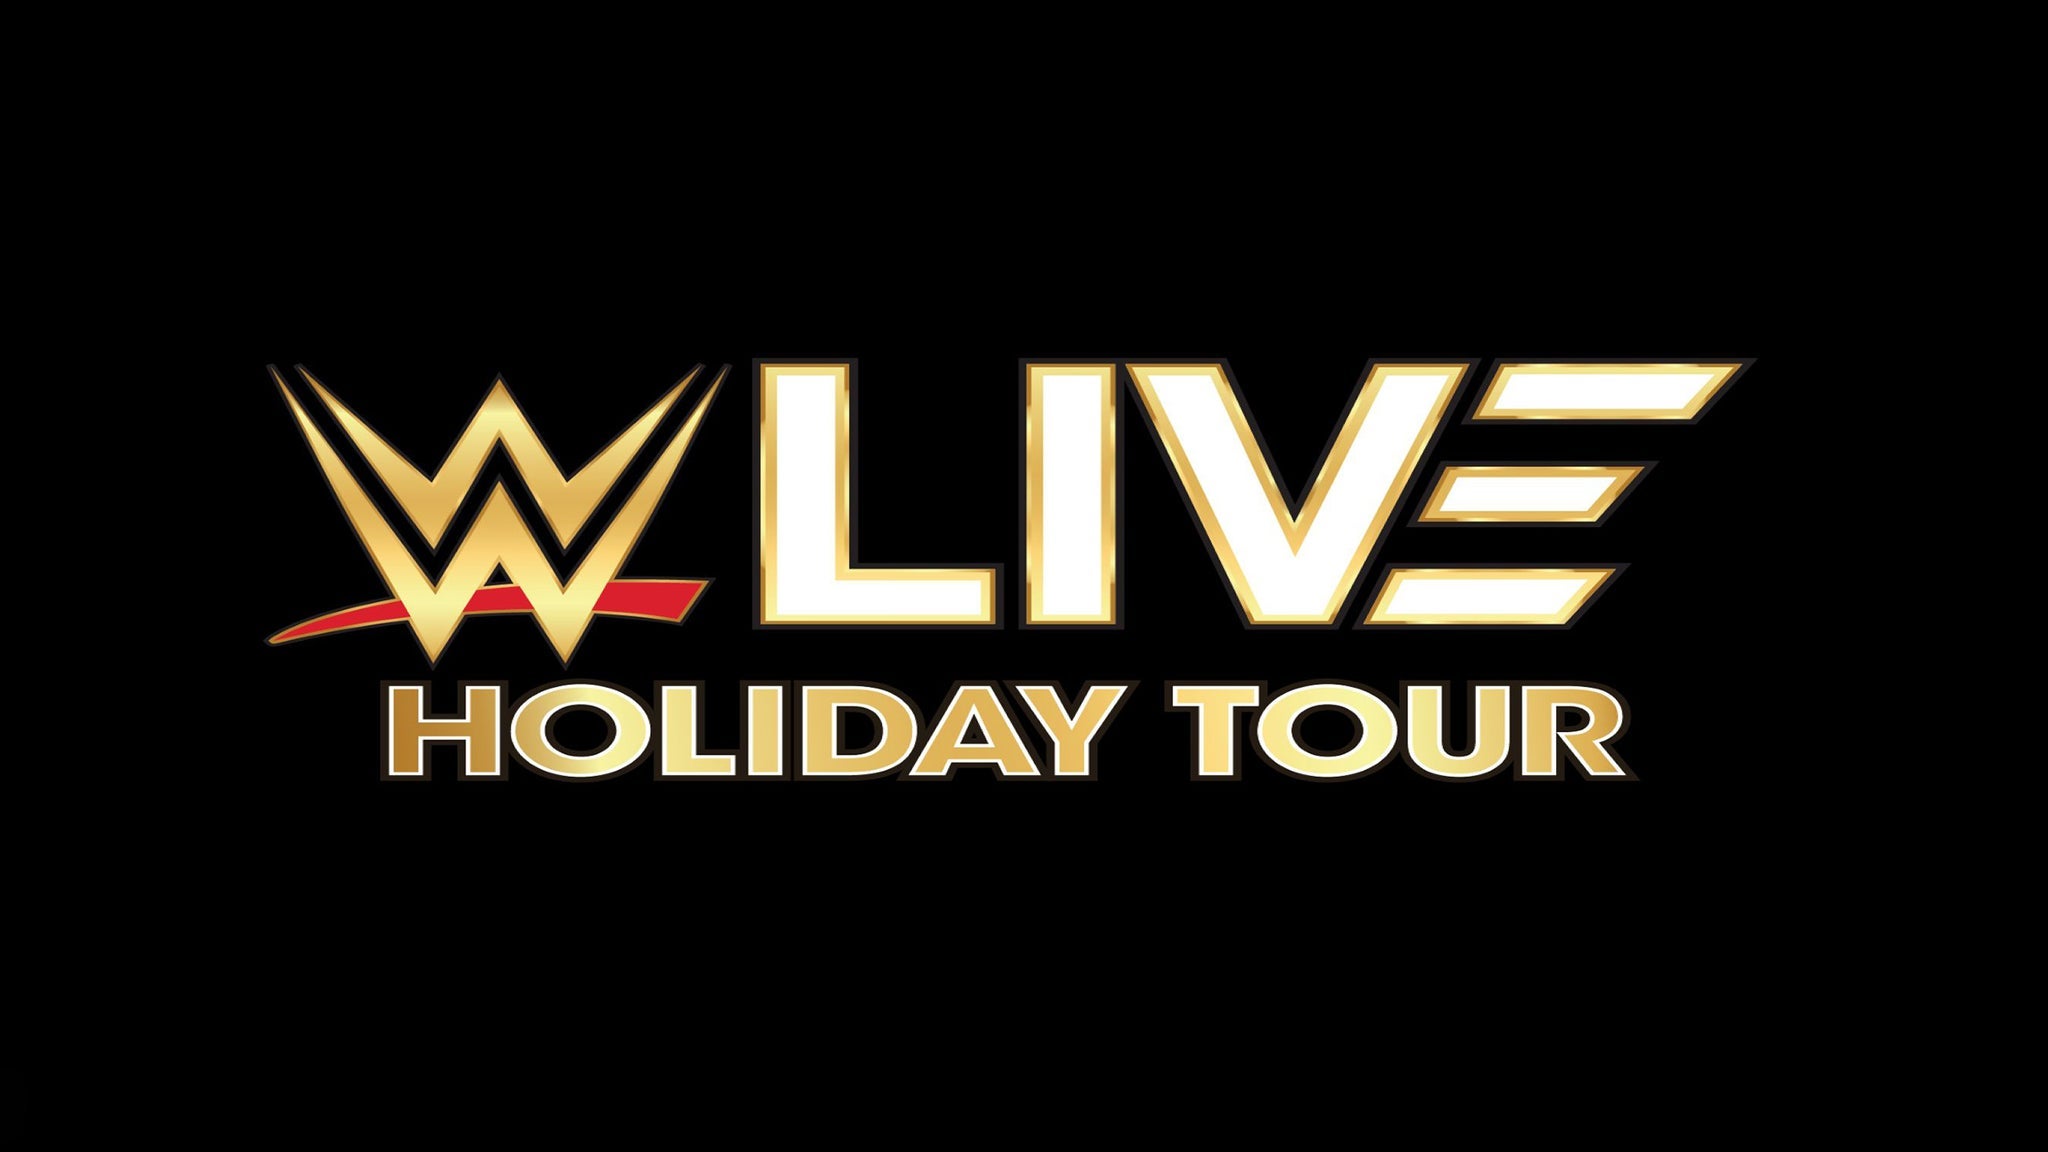 WWE Live Holiday Tour in University Park promo photo for WWE Package presale offer code